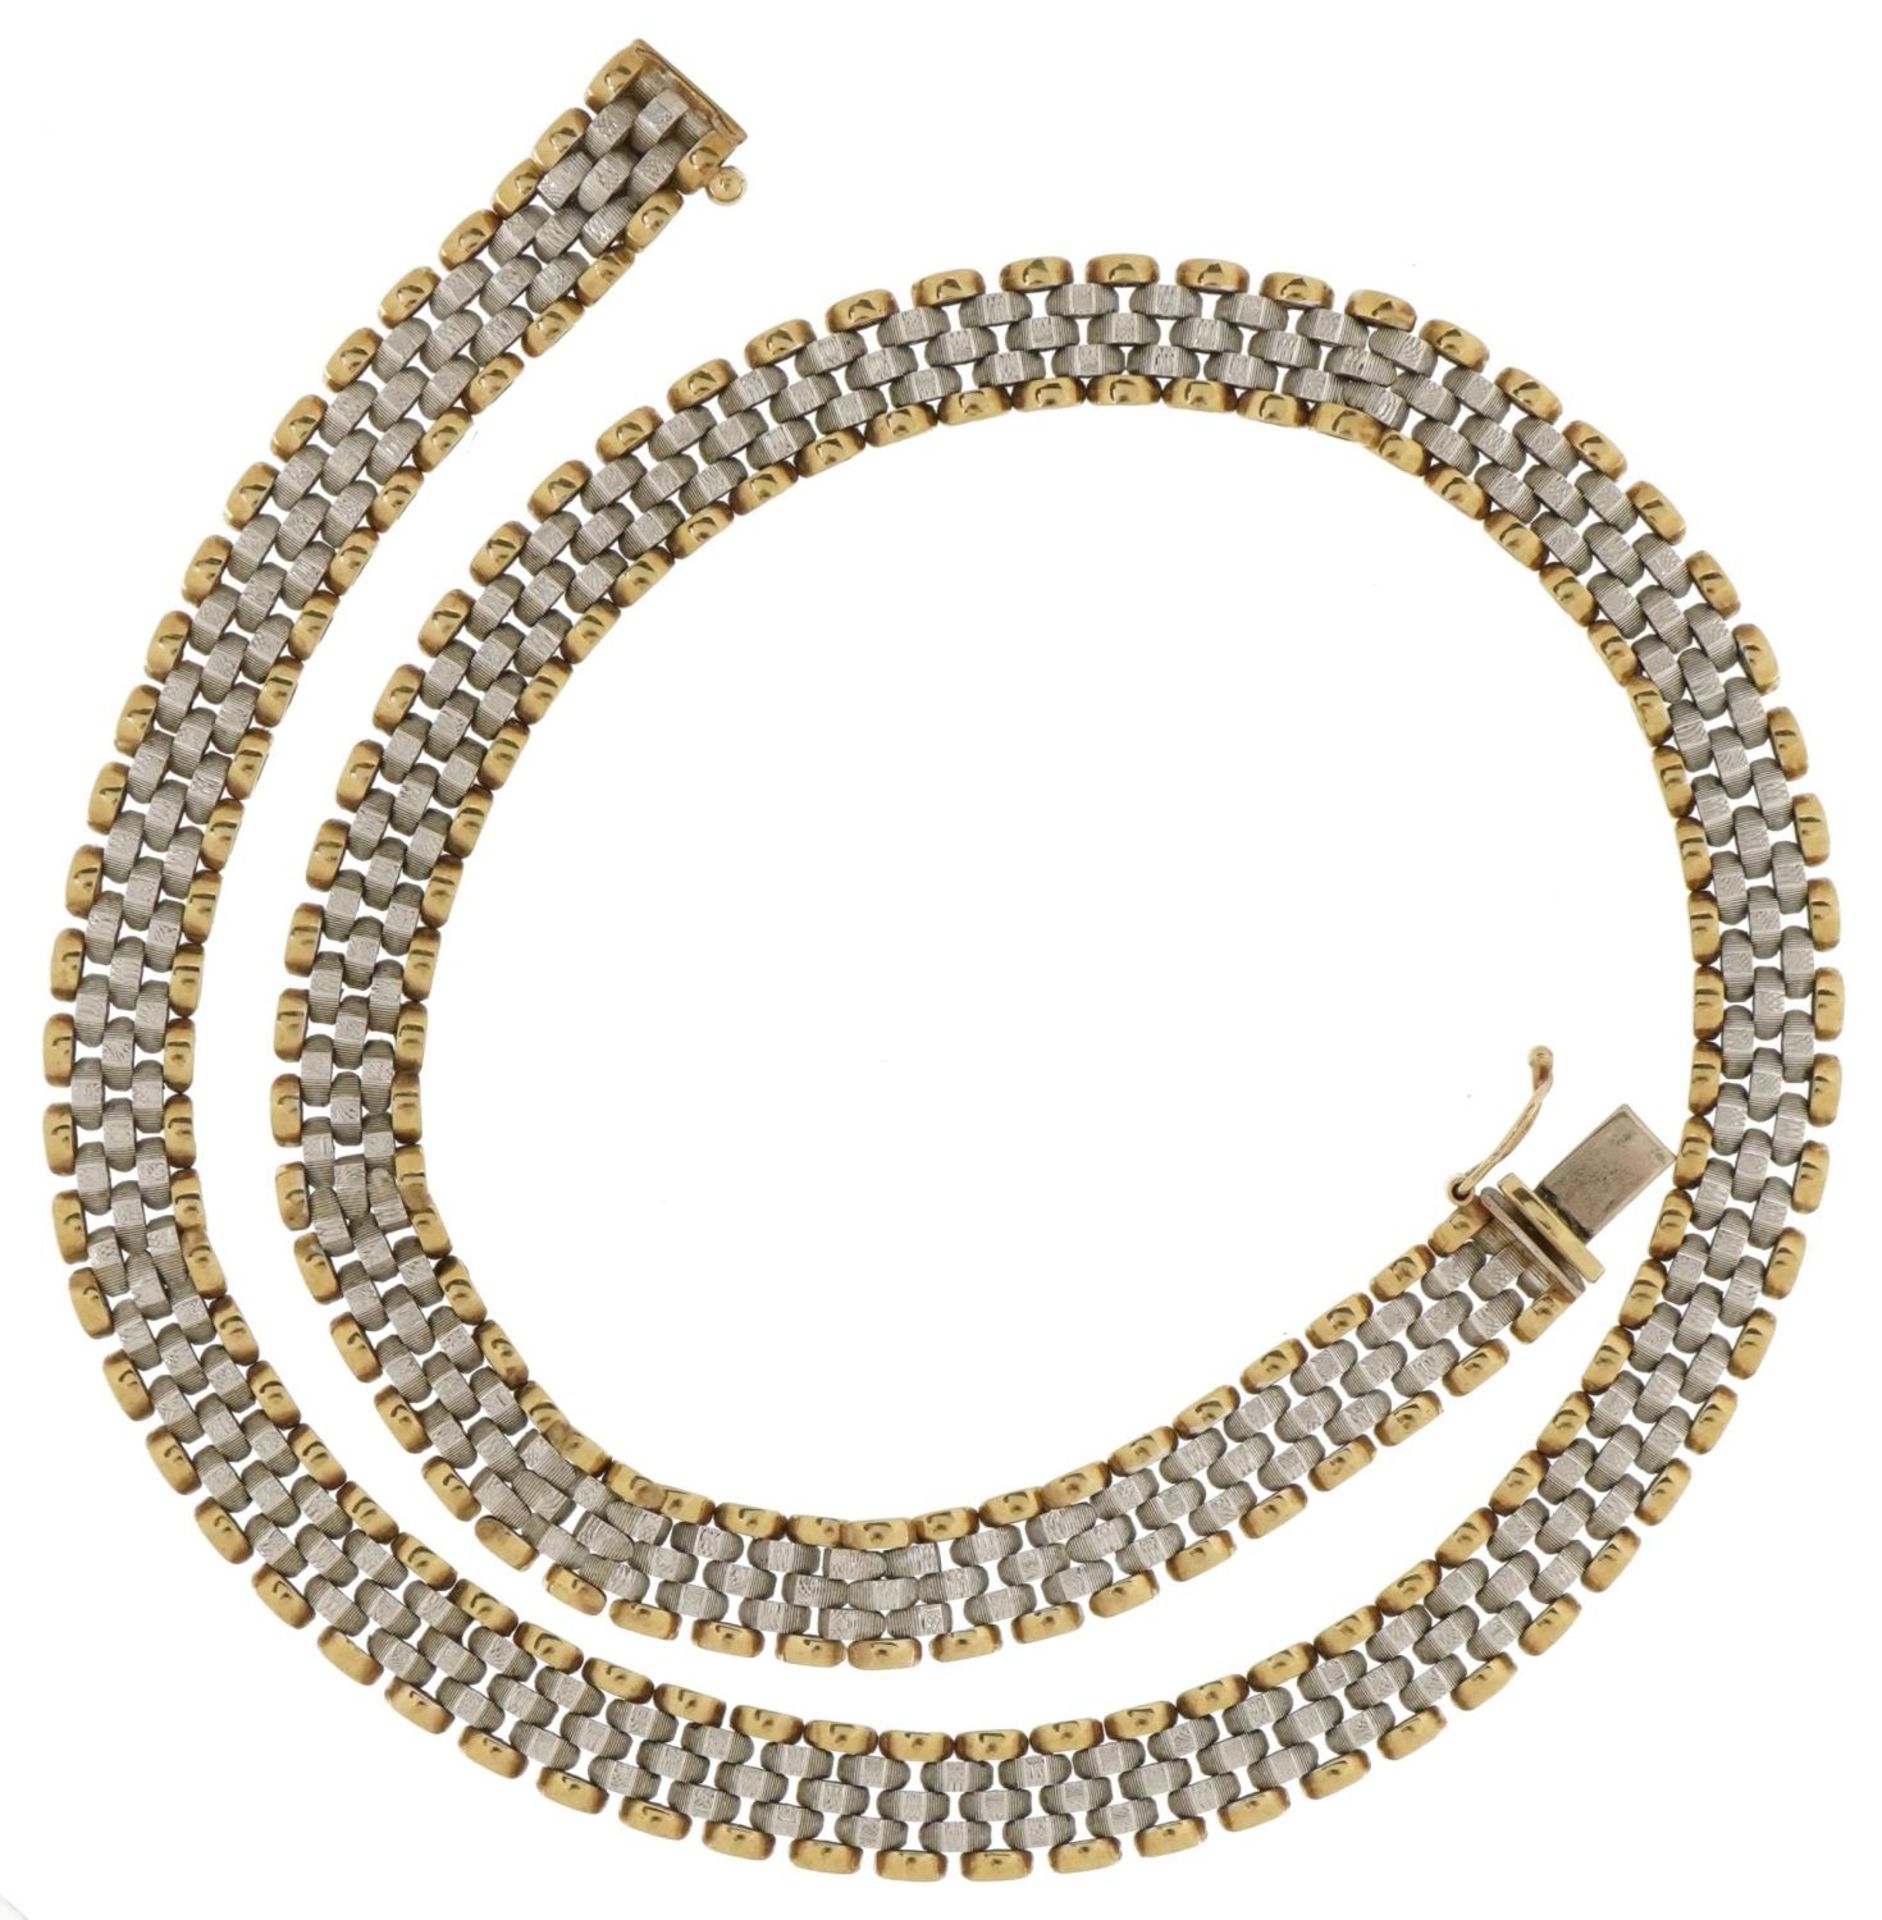 9ct two tone gold watch strap design necklace, 40cm in length, 25.5g : For further information on - Bild 2 aus 4